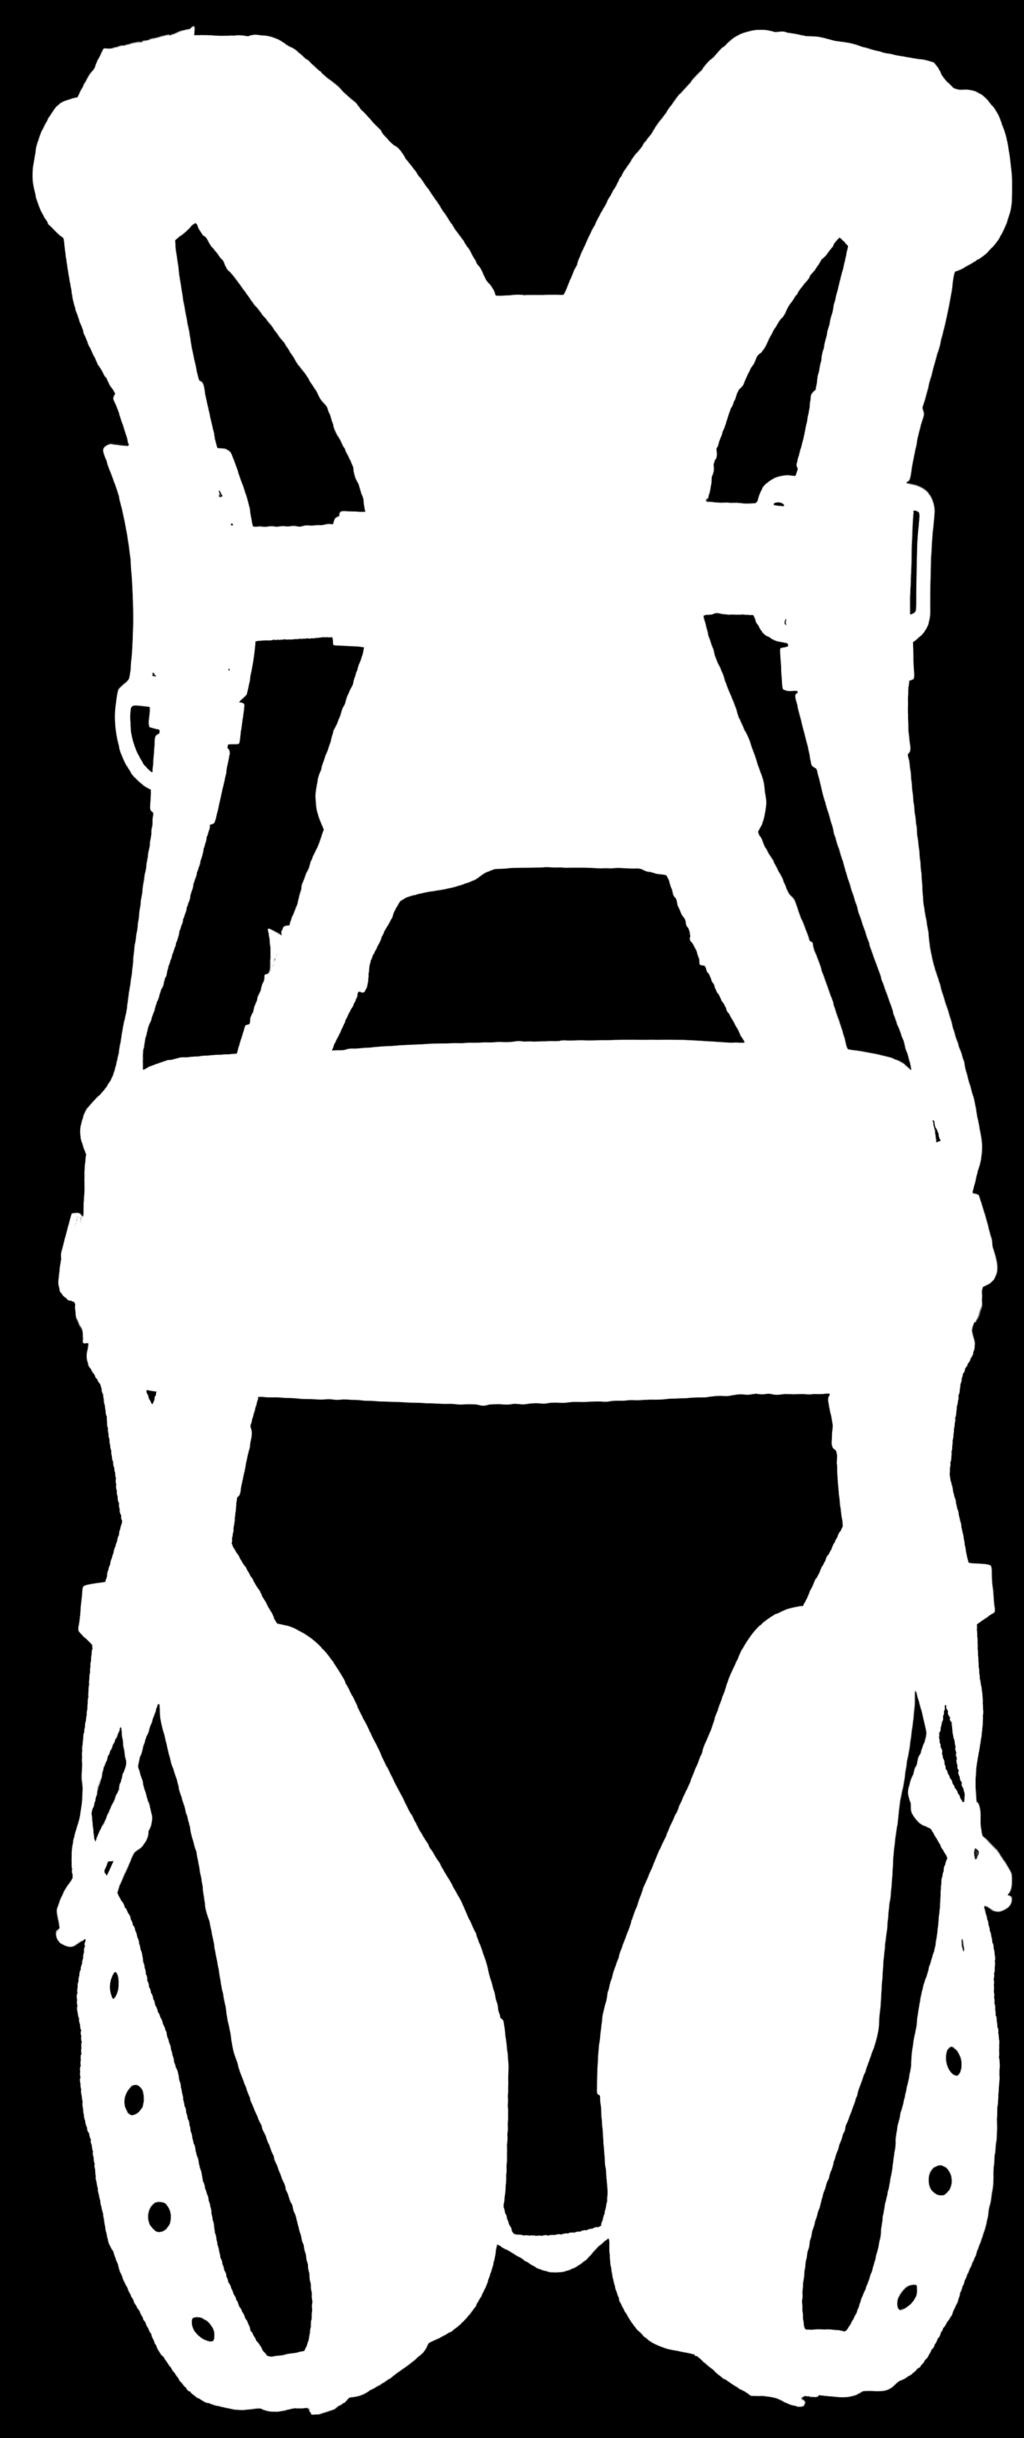 Straps for added support during suspension or in the event of a fall.